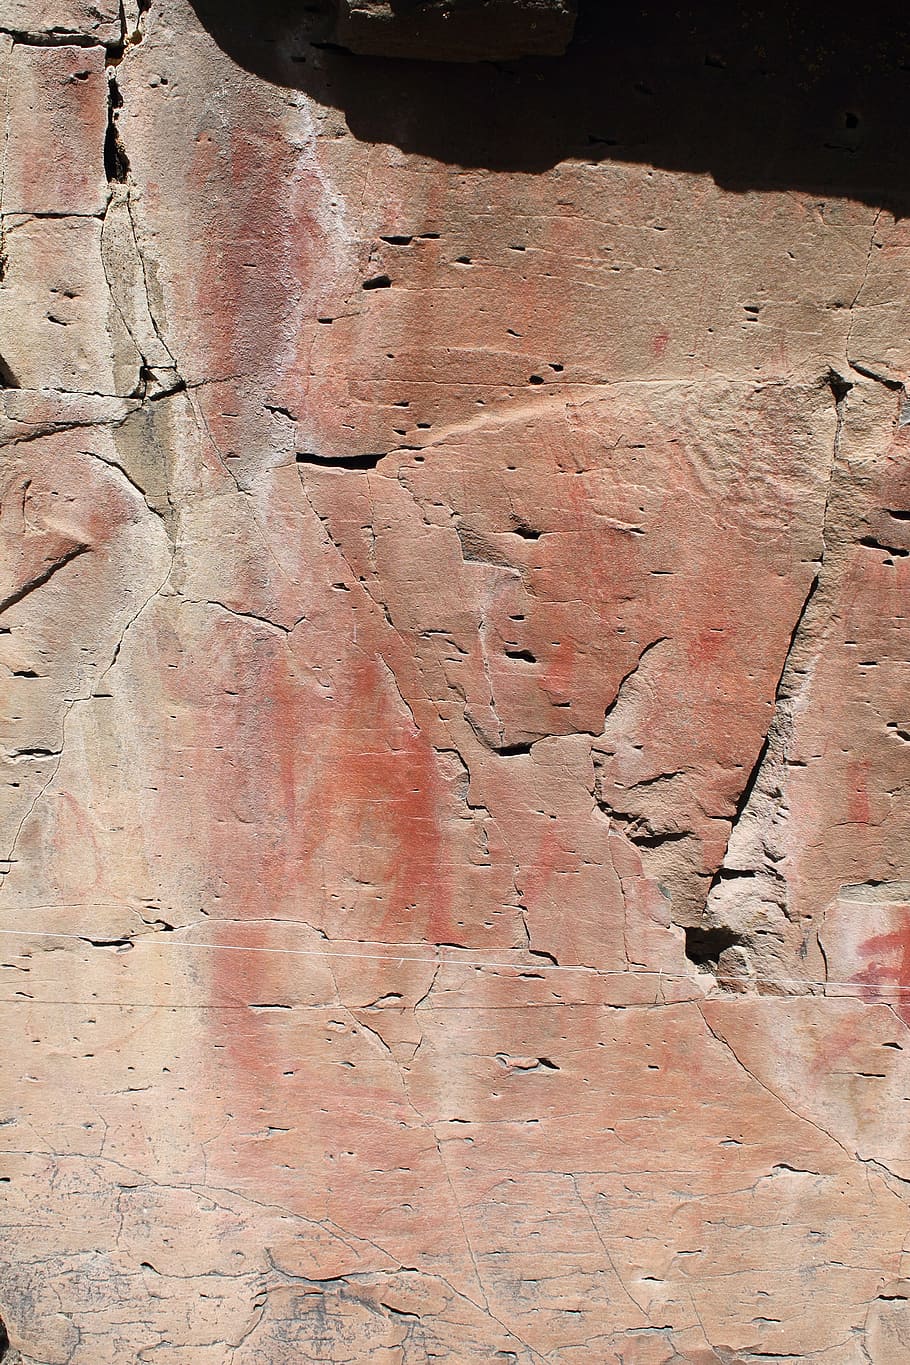 pictograph, rock art, drawing, native american, indian, primitive, close-up, wall painting, native, american